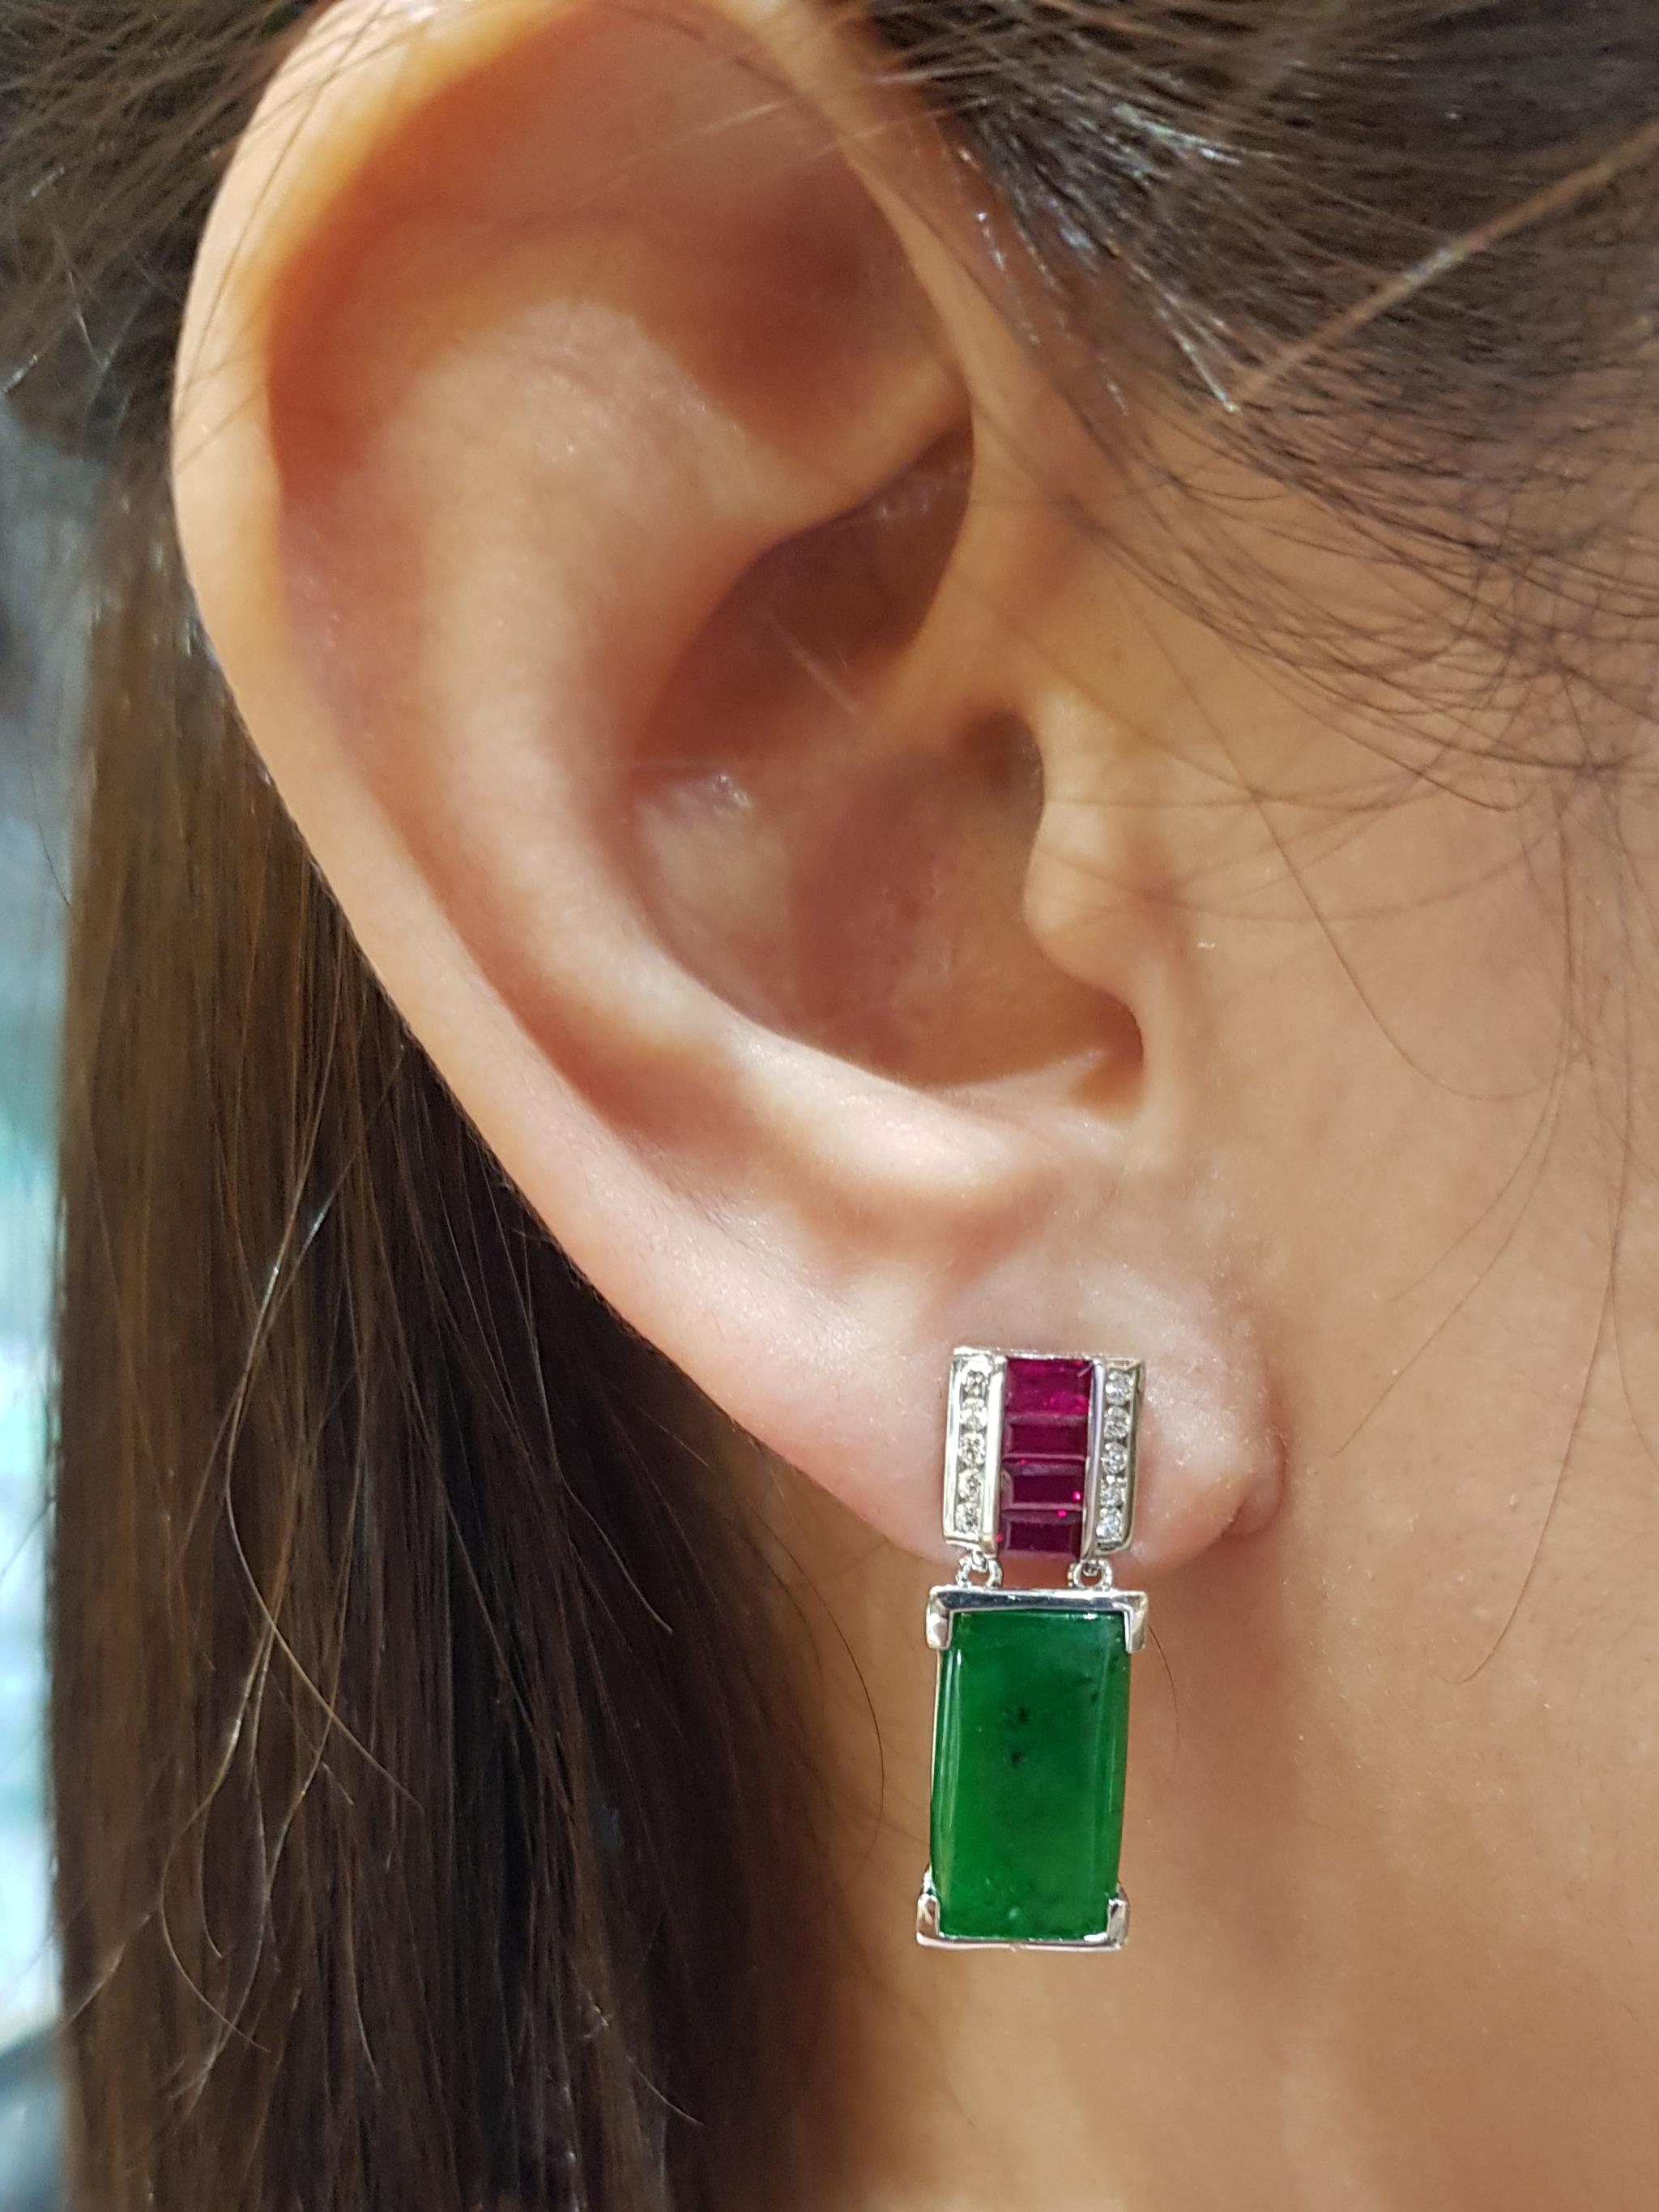 Jade 4.05 carats with Ruby 0.18 carat and Diamond 0.17 carat Earrings set in 18 Karat White Gold Settings

Width:  0.7 cm 
Length: 2.5 cm
Total Weight: 8.56 grams

